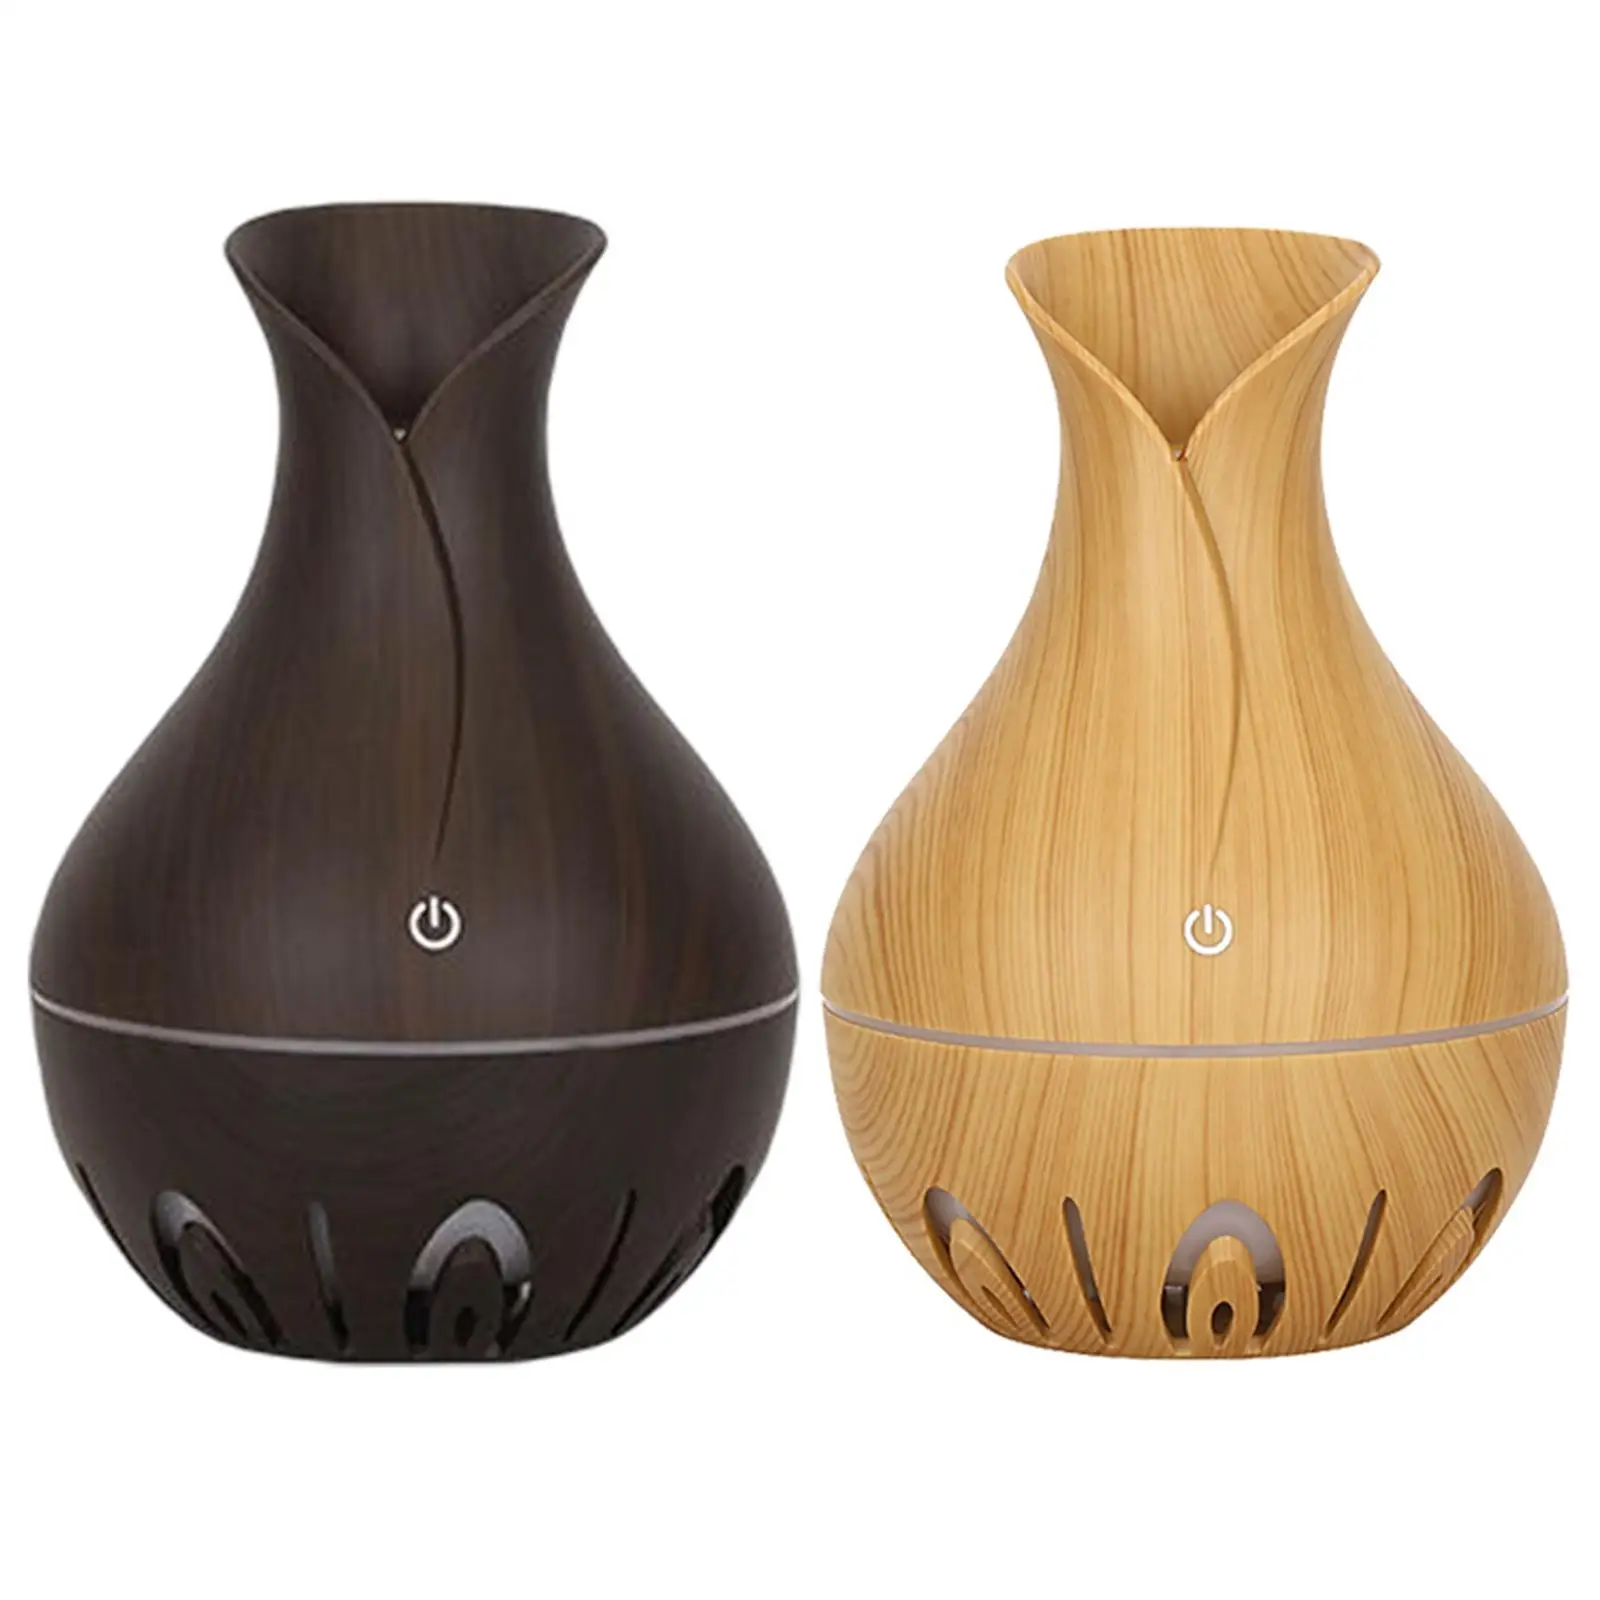 Essential Oil Diffuser Ultrasonic LED Super Quiet Humidifier for Gifts Table Travel